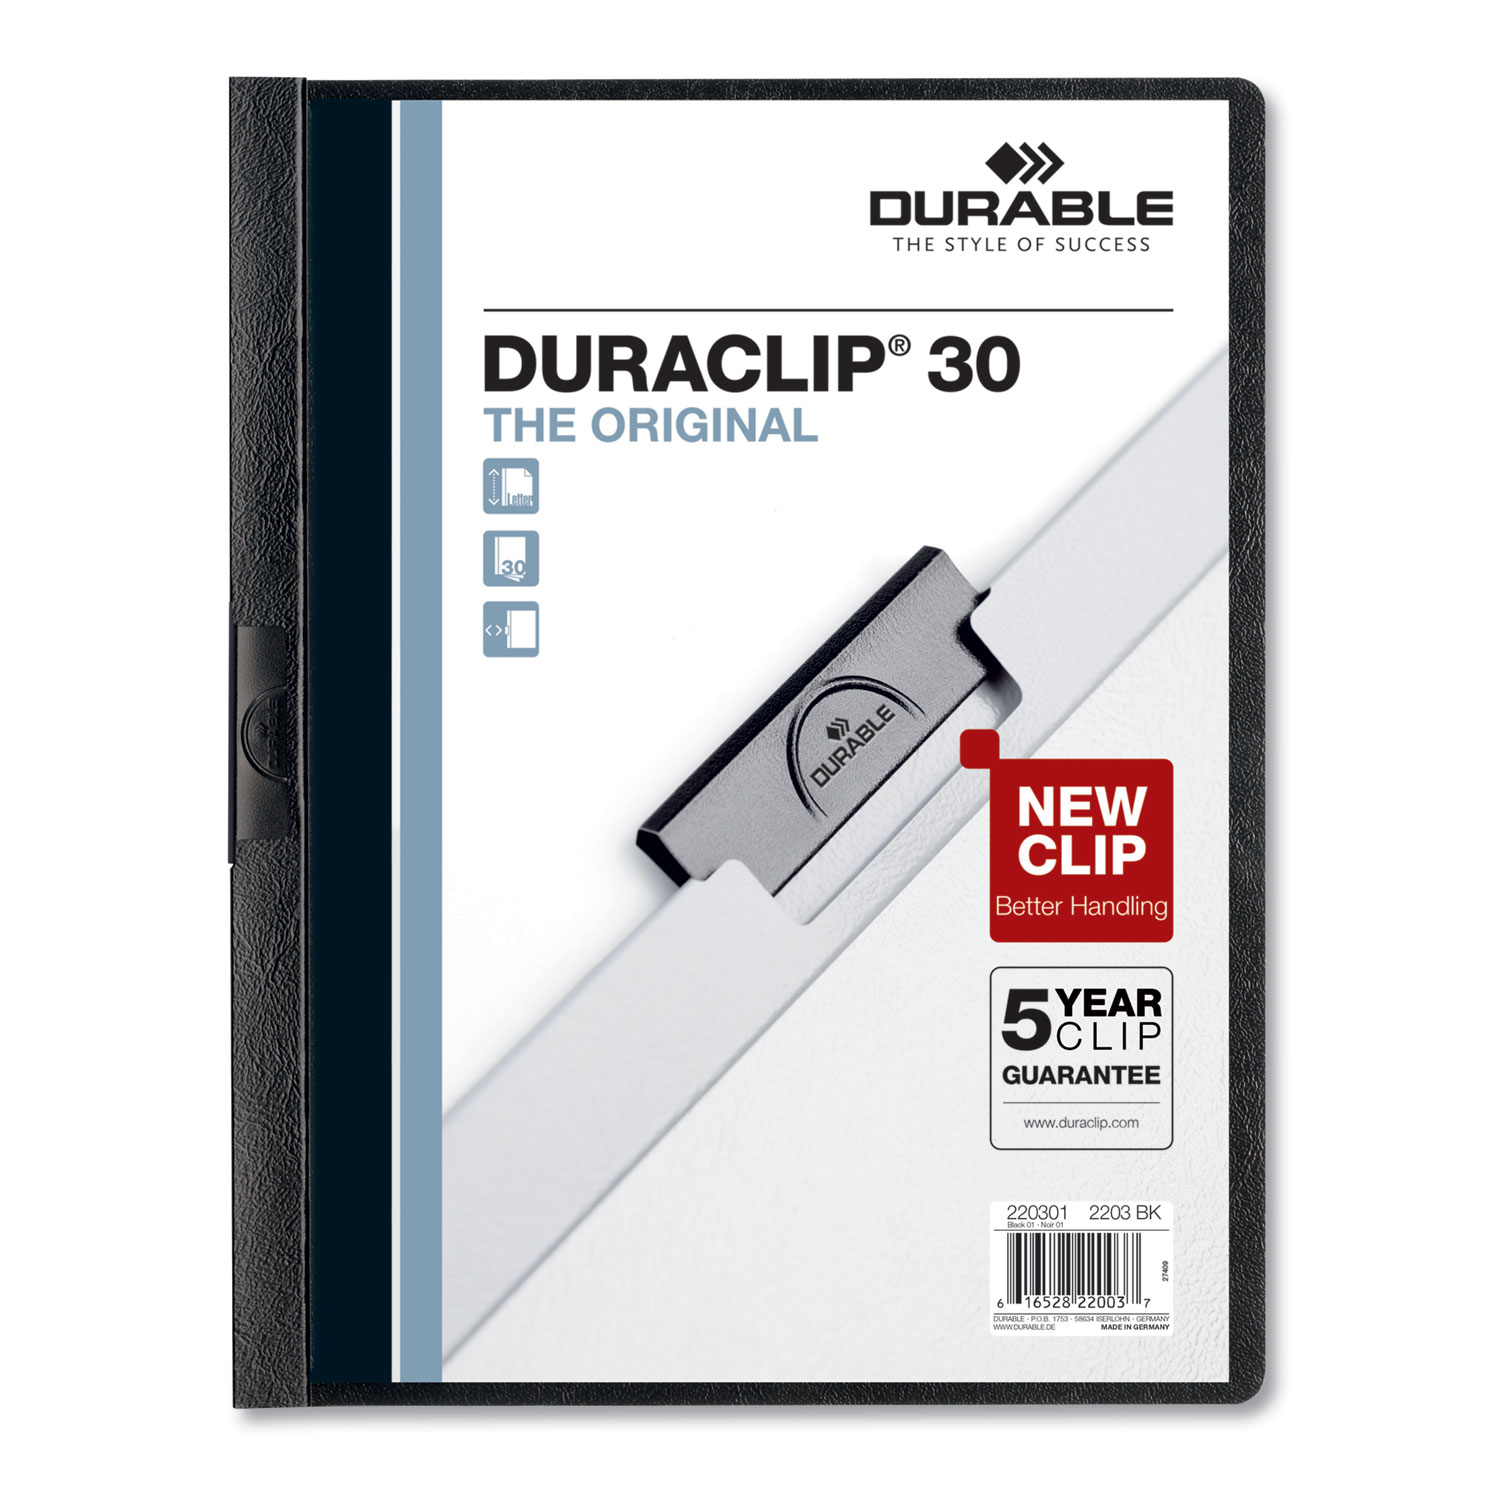  Durable 220301 Vinyl DuraClip Report Cover w/Clip, Letter, Holds 30 Pages, Clear/Black, 25/Box (DBL220301) 